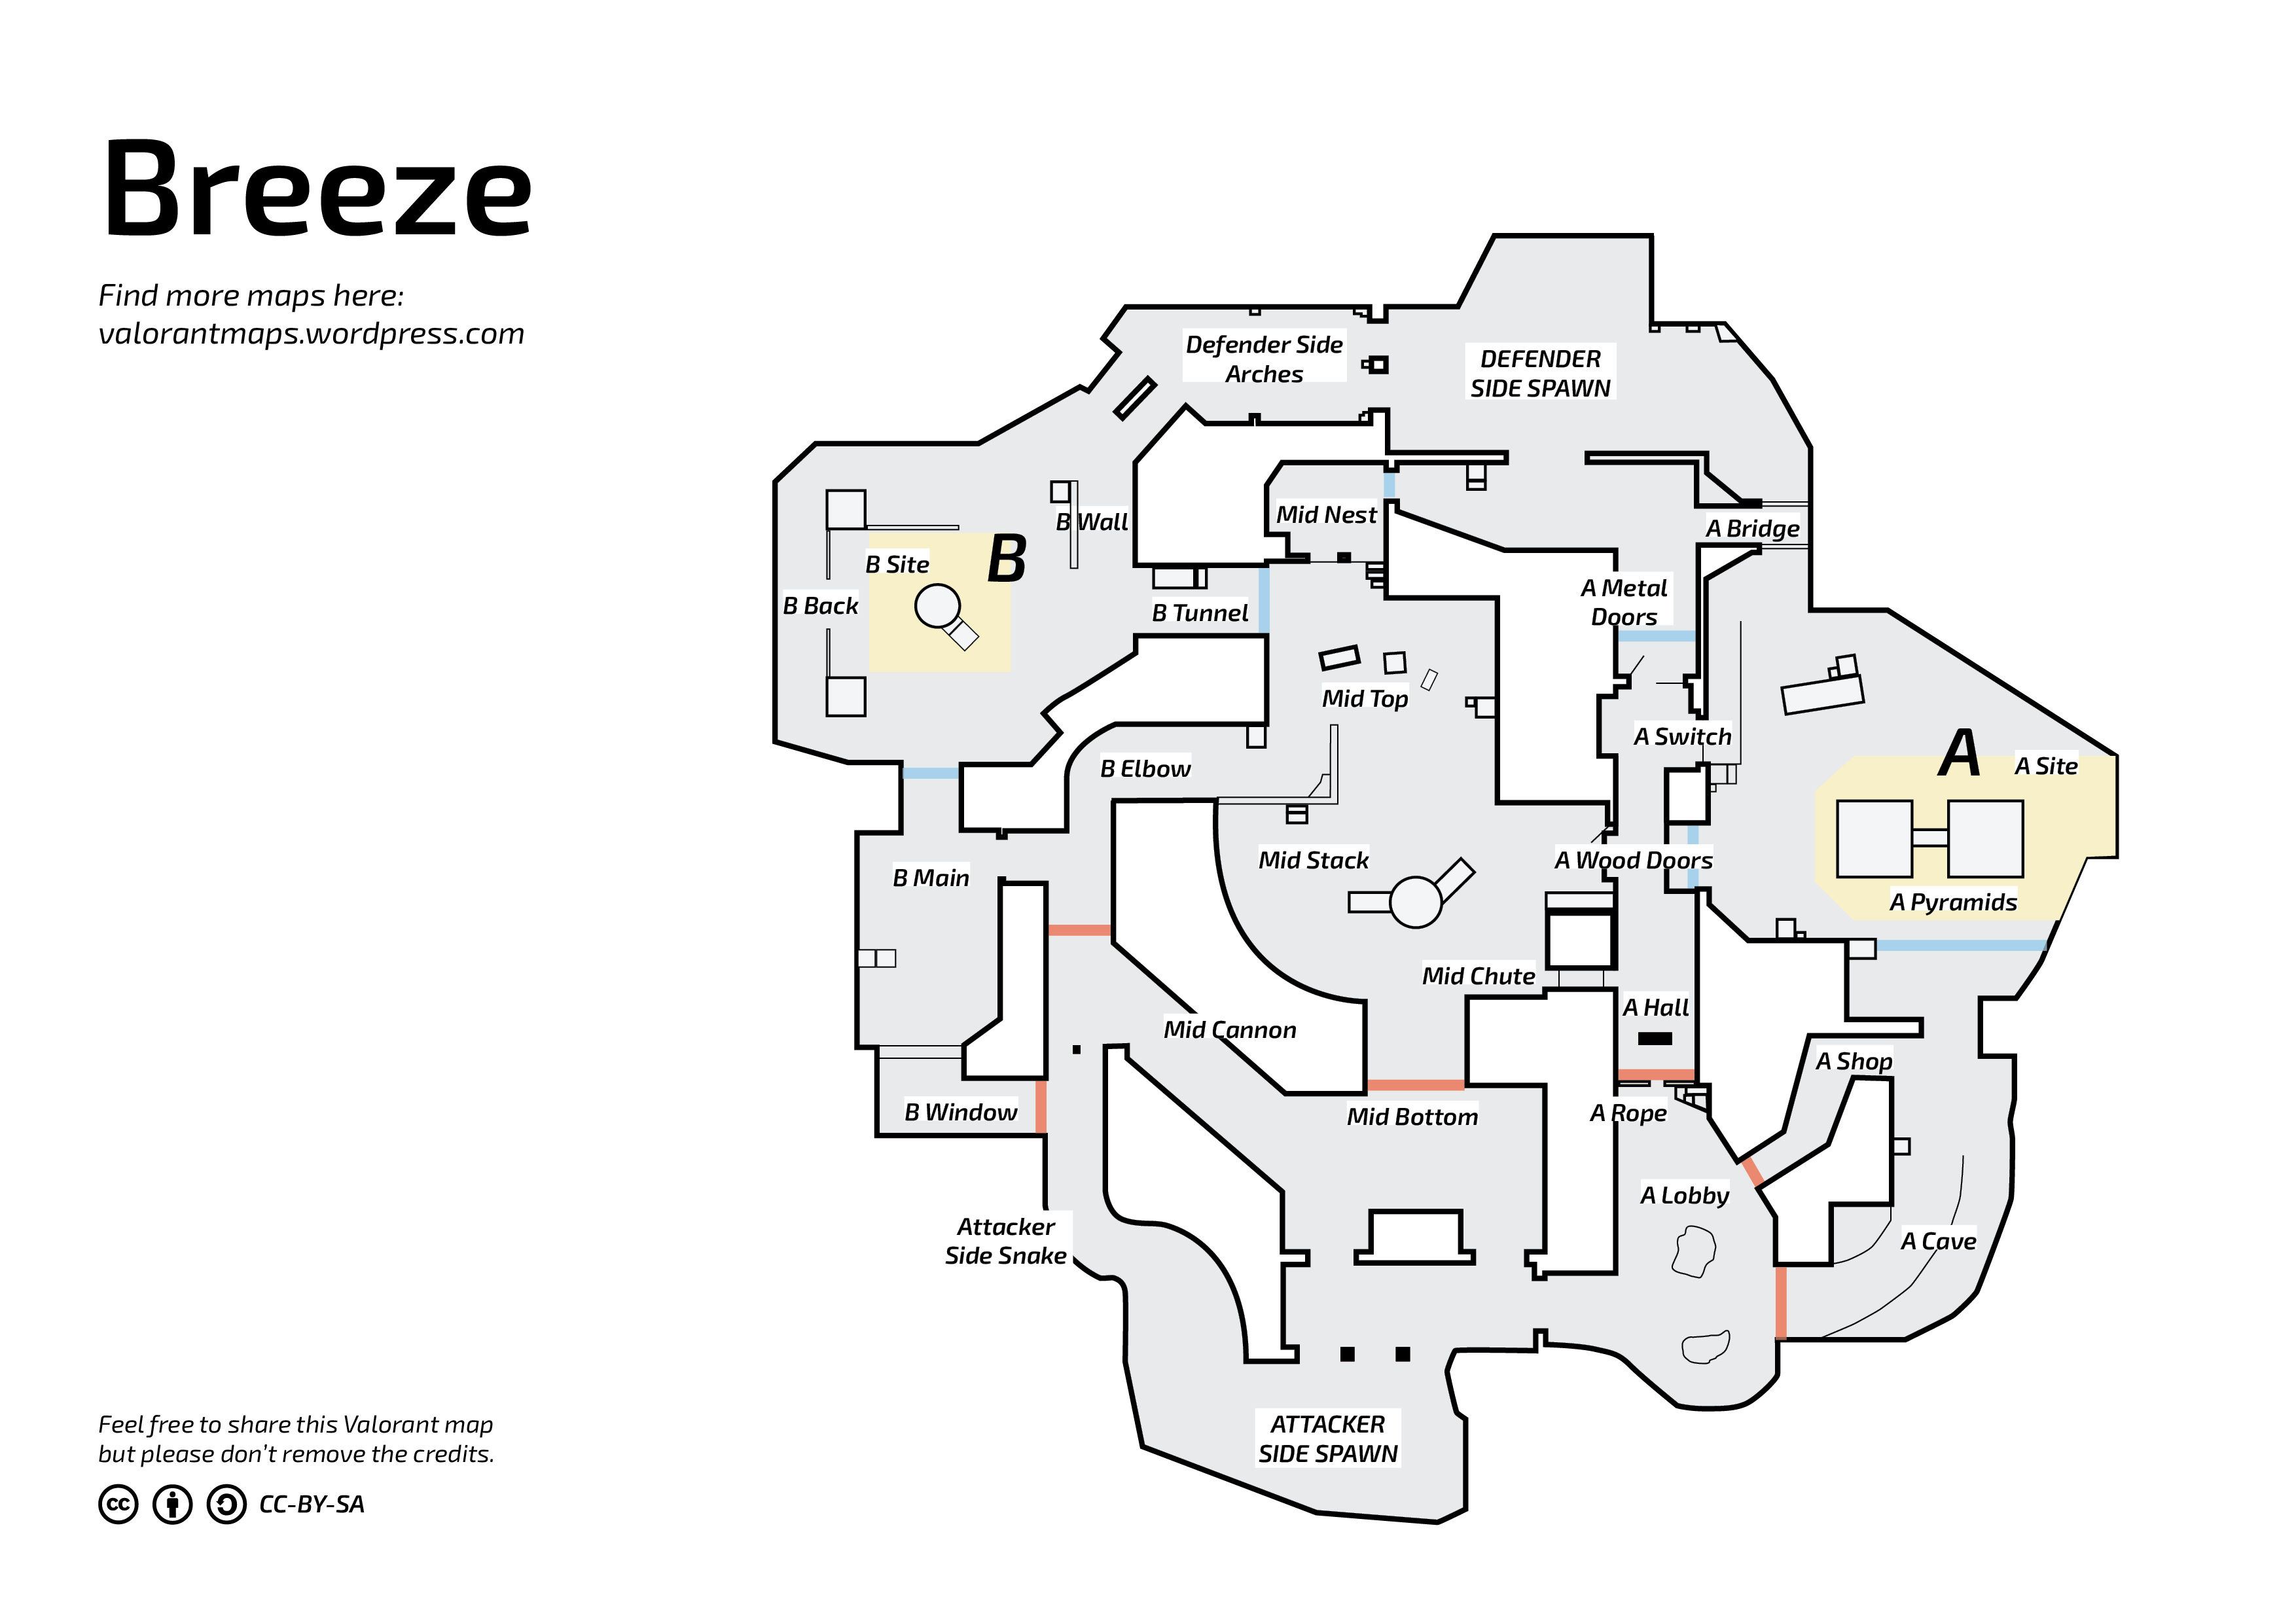 Breeze Strat Pack. Breeze is a pretty static map in terms…